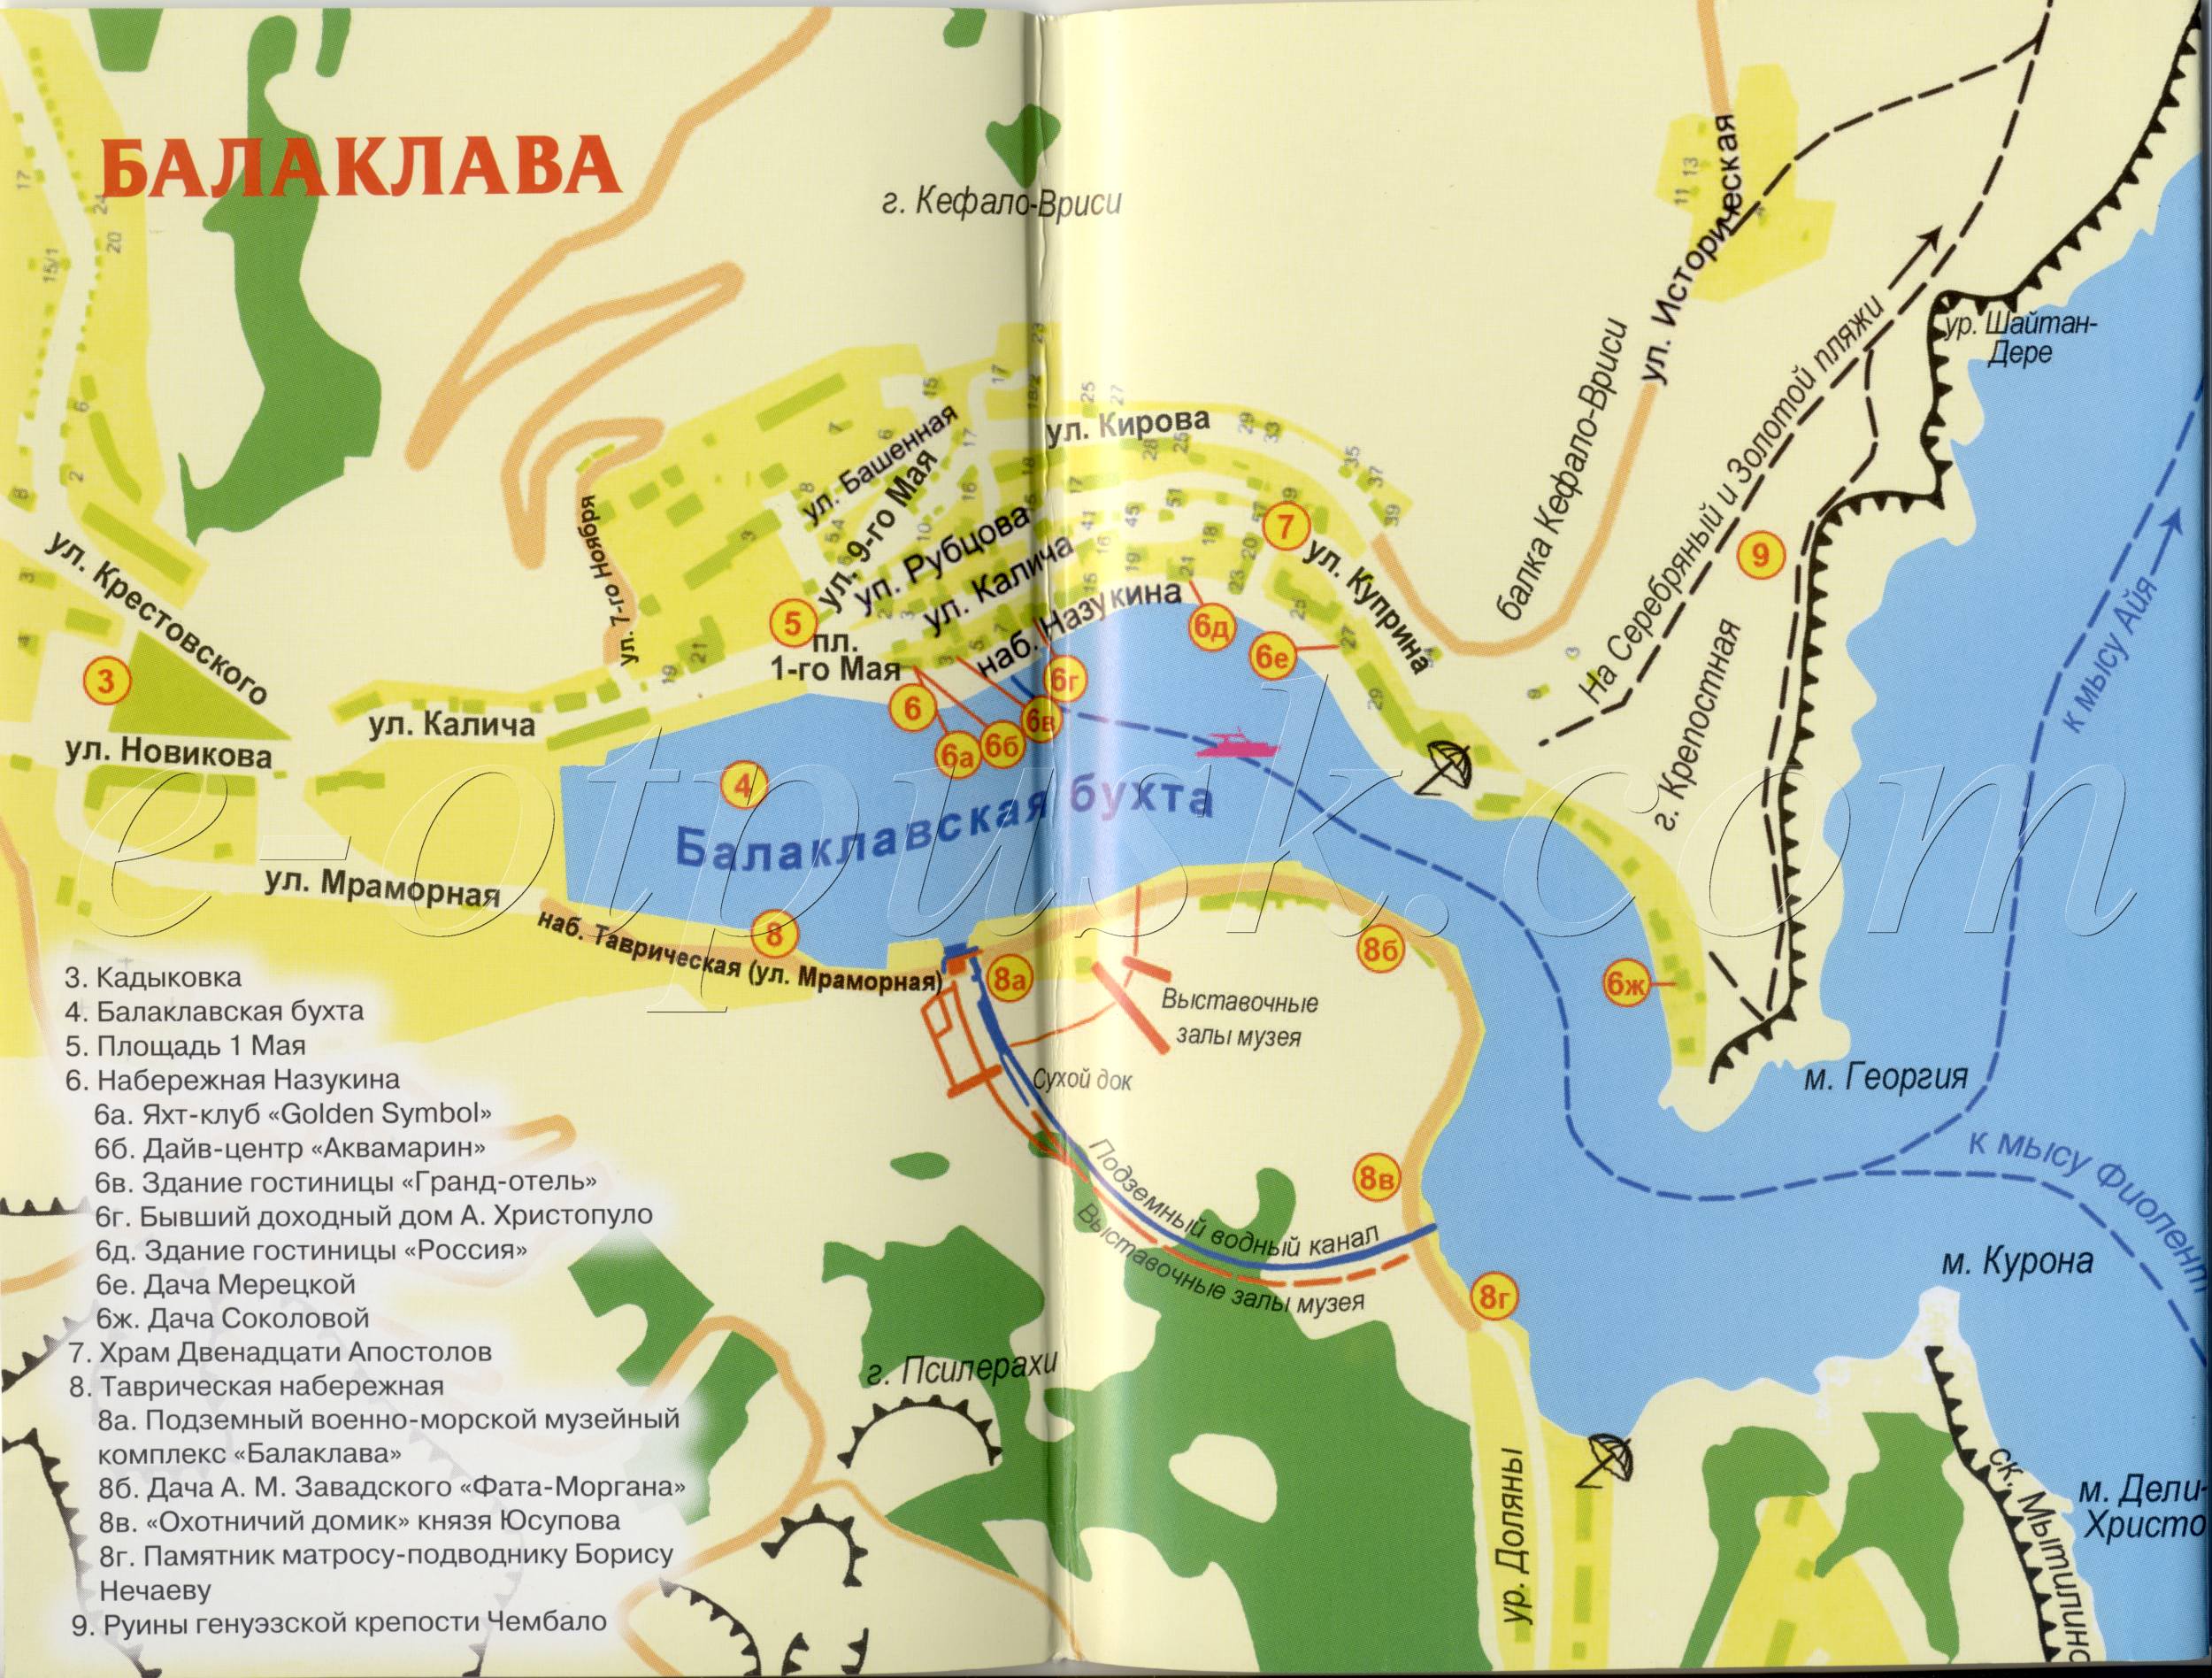 Map of Balaklava (map-scheme showing the sights of Balaklava). download for free